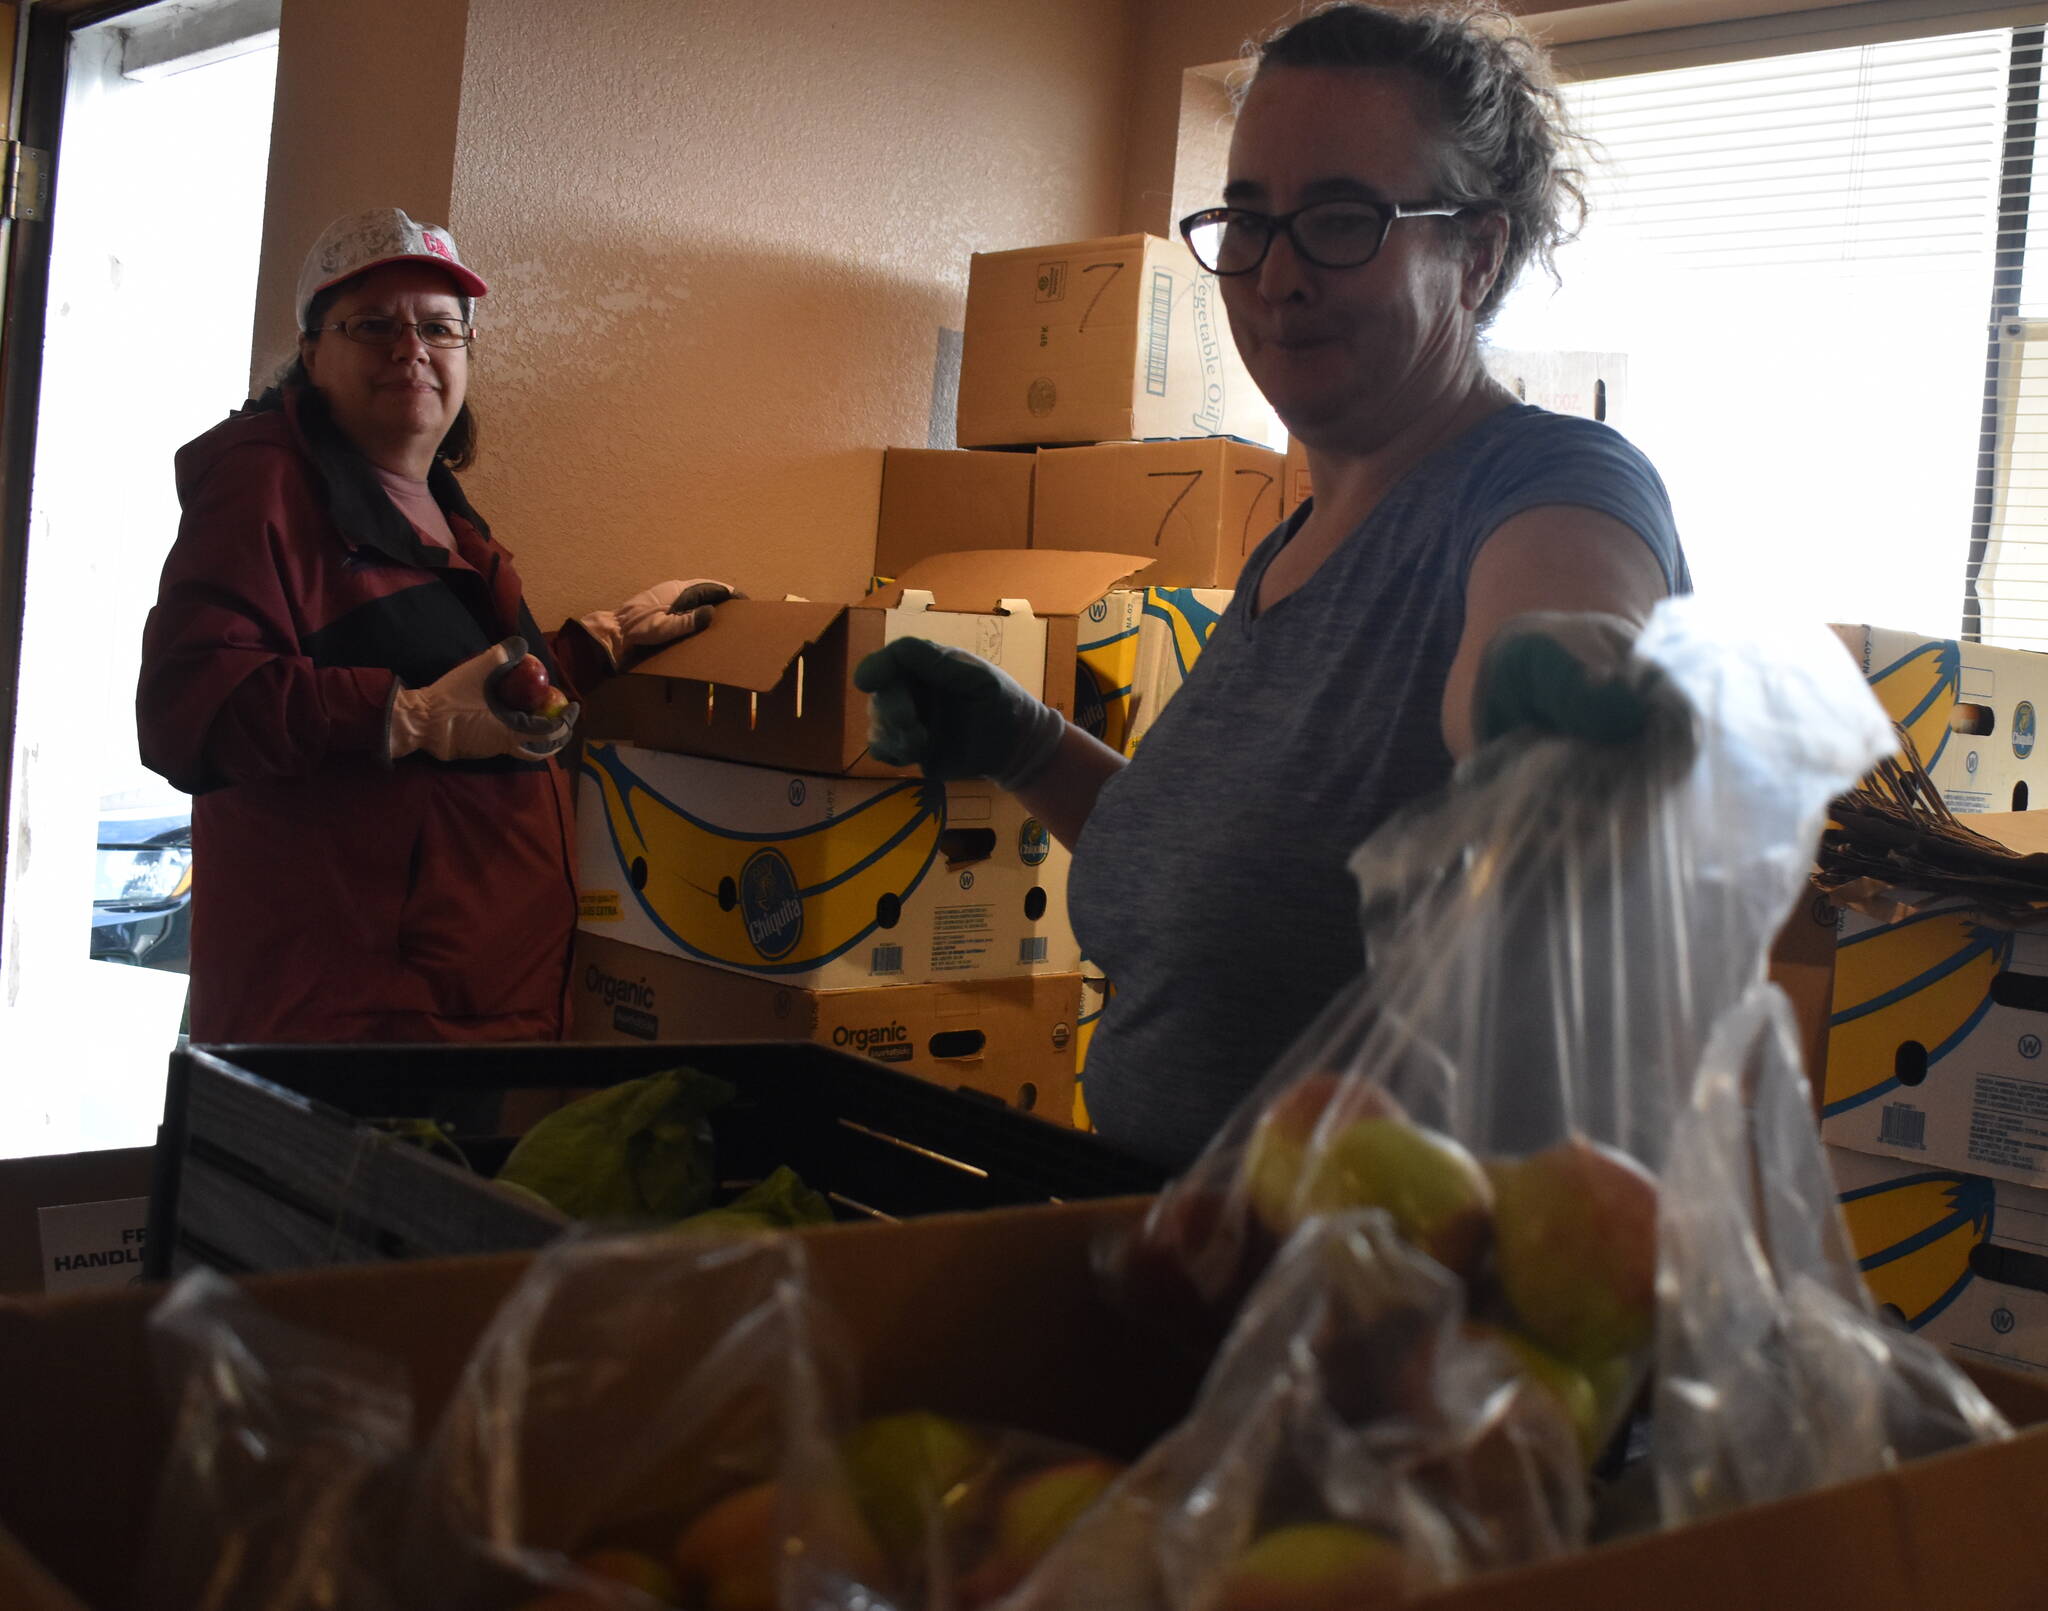 Clayton Franke / The Daily World
Kerri Bramstedt, right, and Joelle Buckman prepare bags of apples at the Aberdeen Food Bank on Sept. 19.